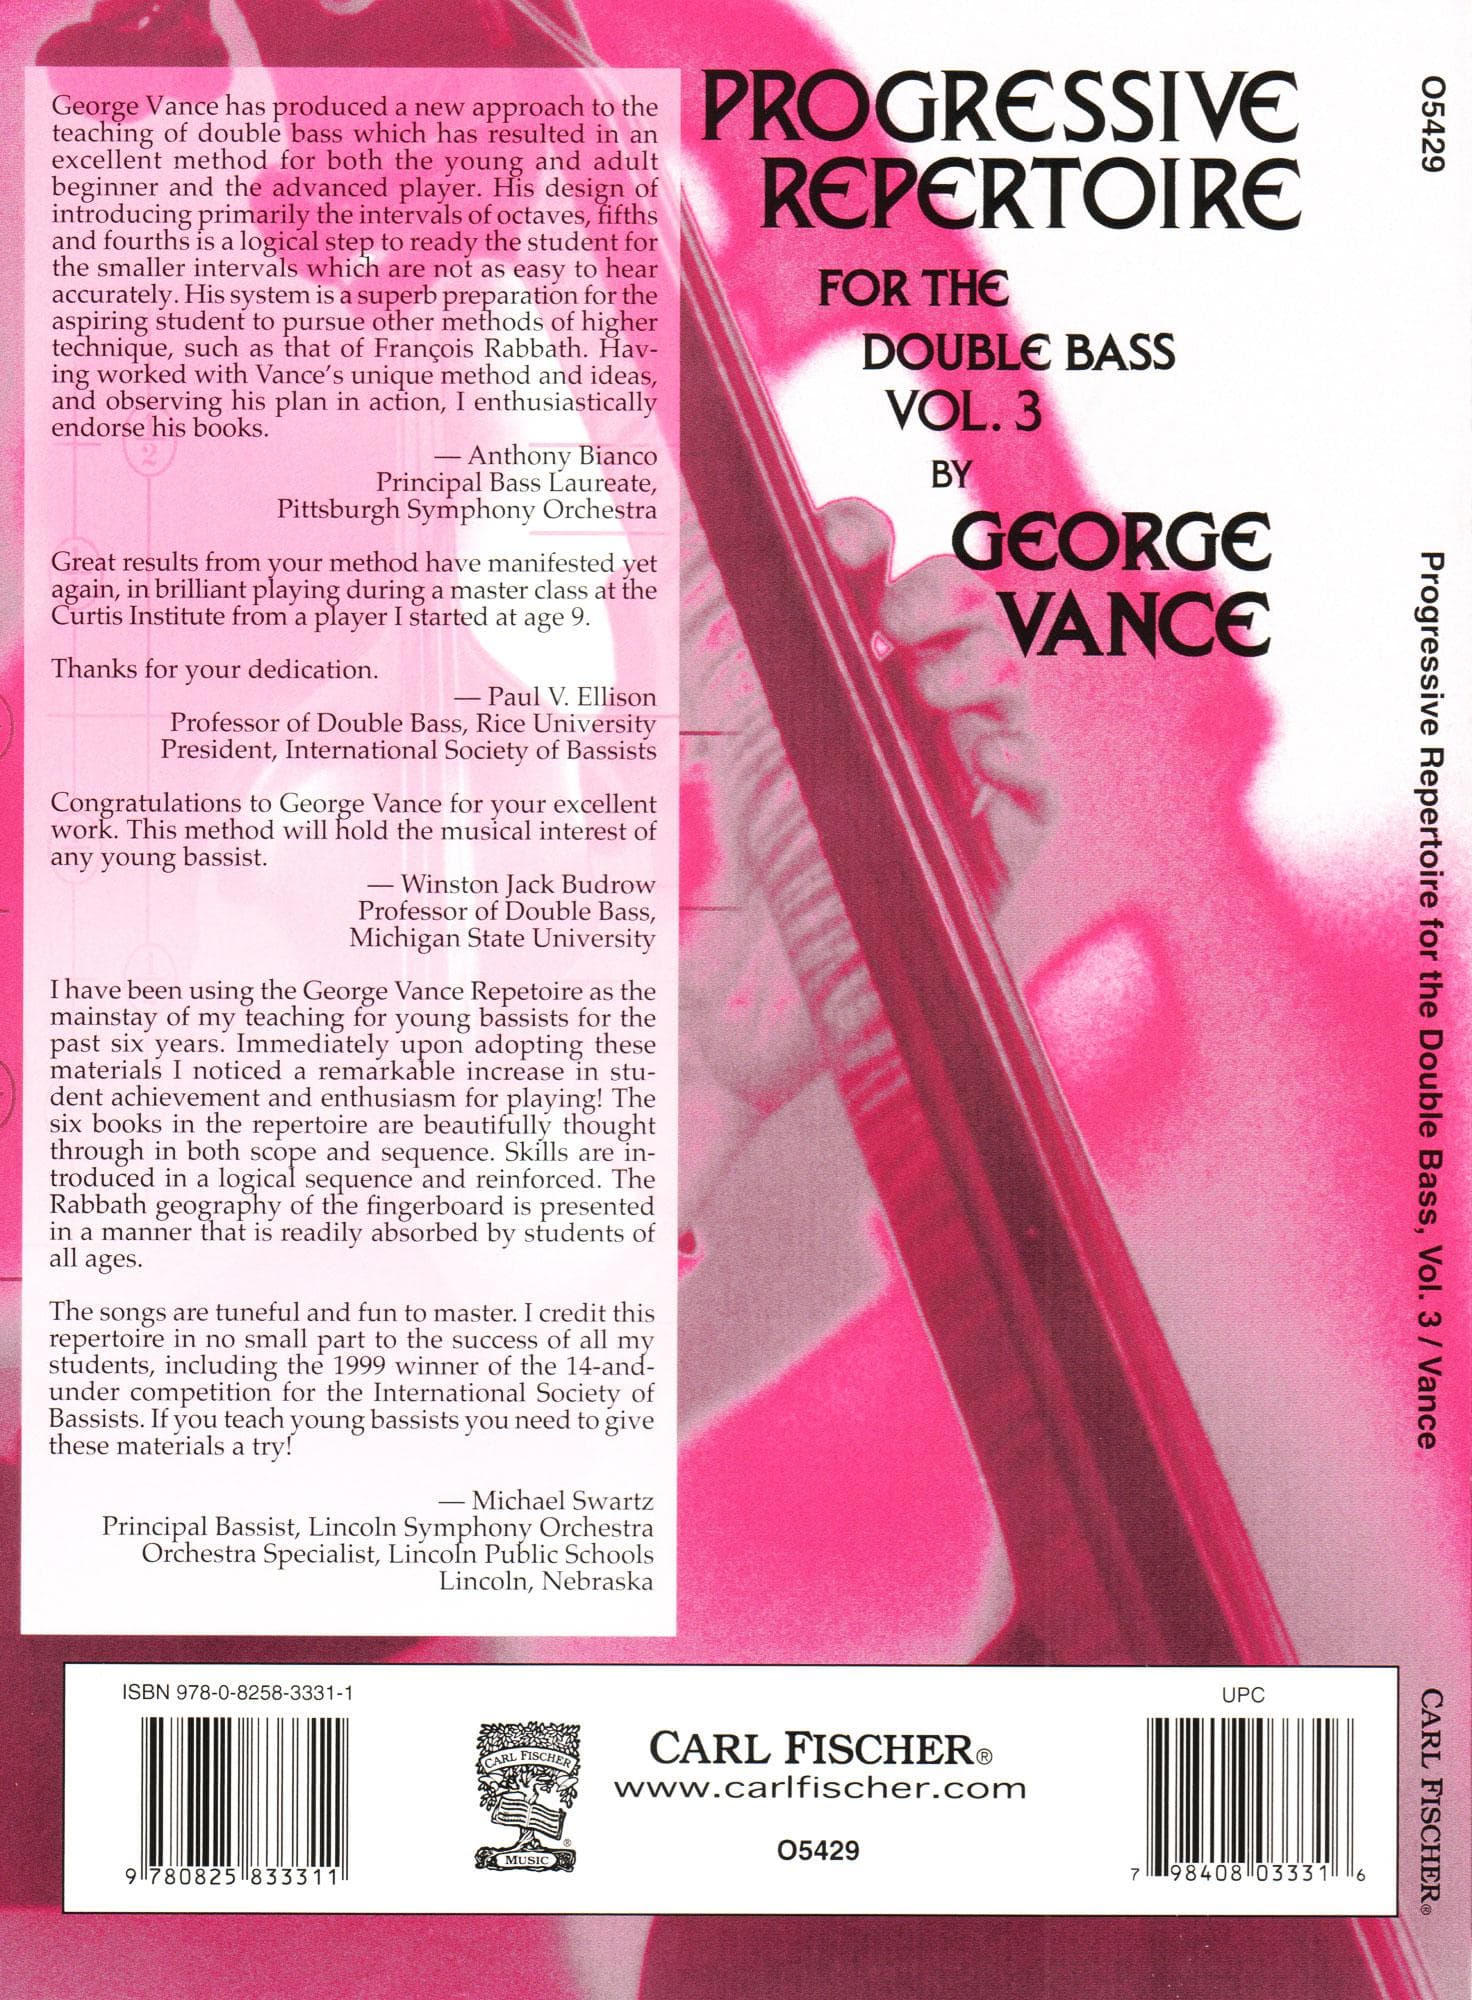 Progressive Repertoire for the Double Bass - Volume 3 Bass Book - by George Vance - Published by Carl Fischer